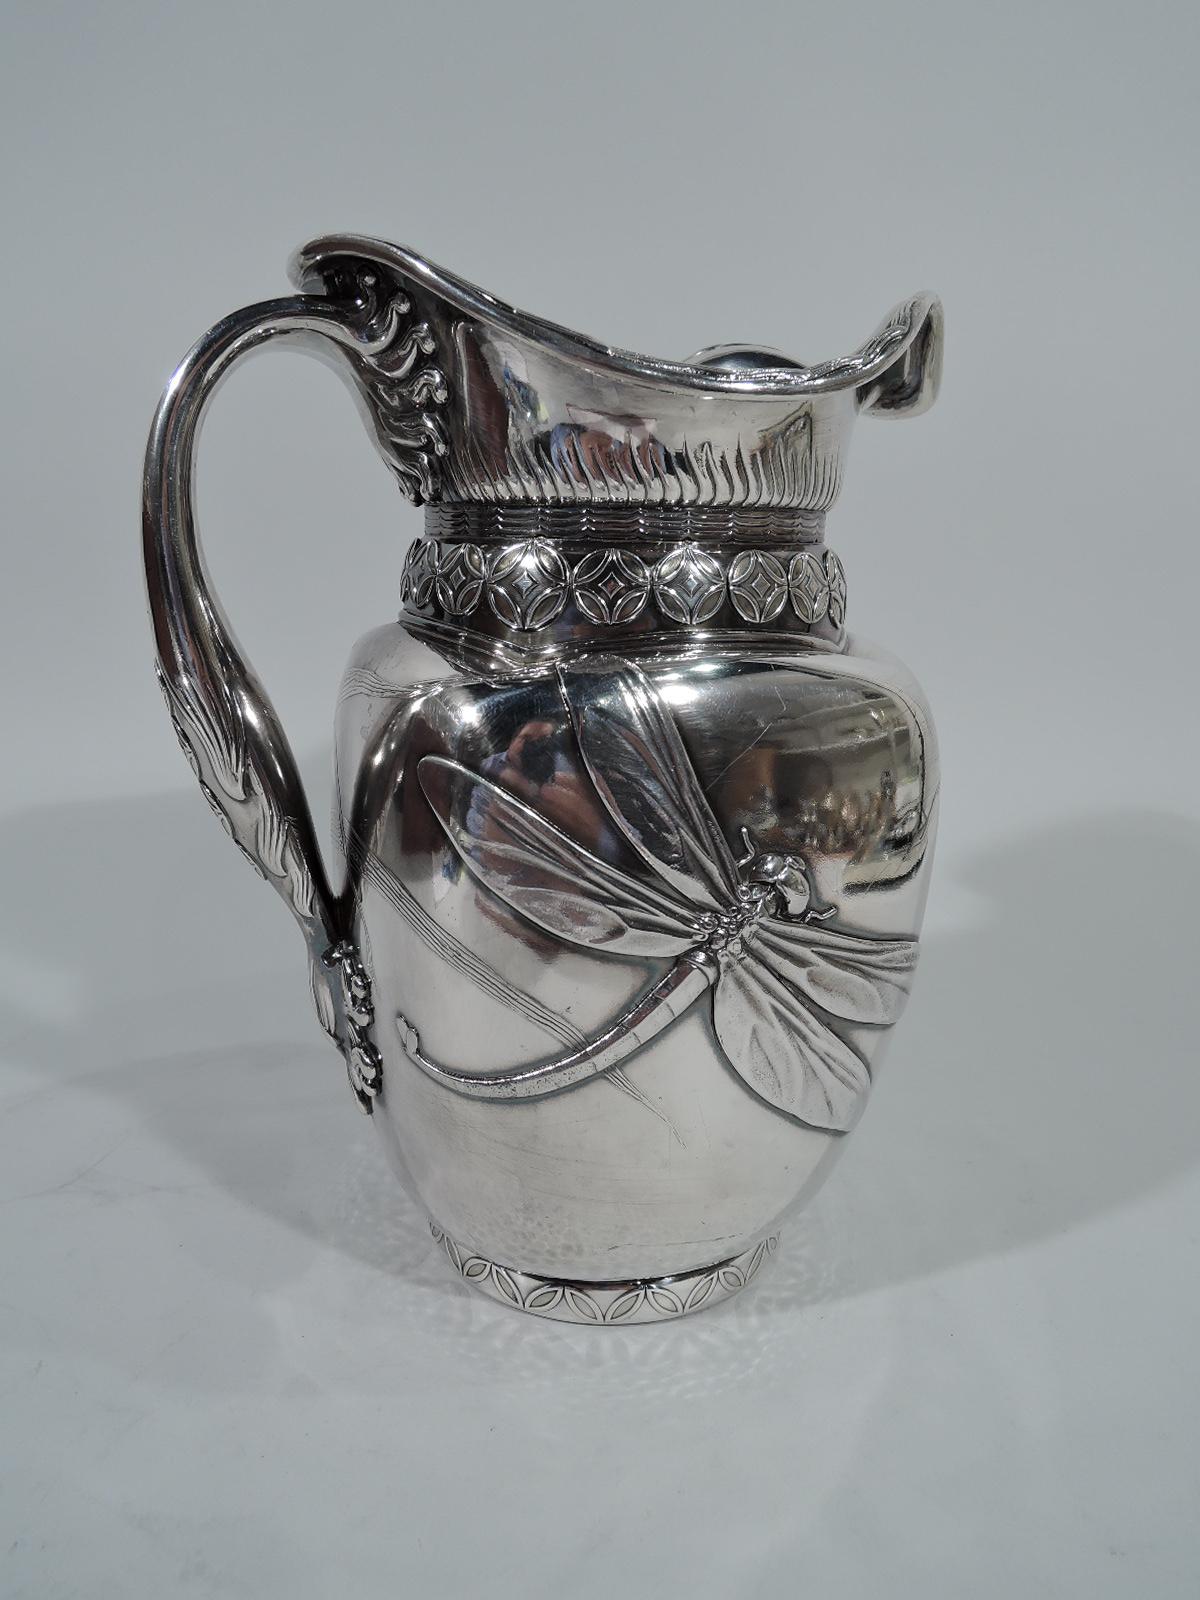 Japonesque sterling silver water pitcher. Made by Whiting in New York, circa 1885. Four curved sides, short round neck, wavy asymmetrical mouth, and scrolled handle. Applied bold spillover ornament. On one side is a dragonfly with wings and tail